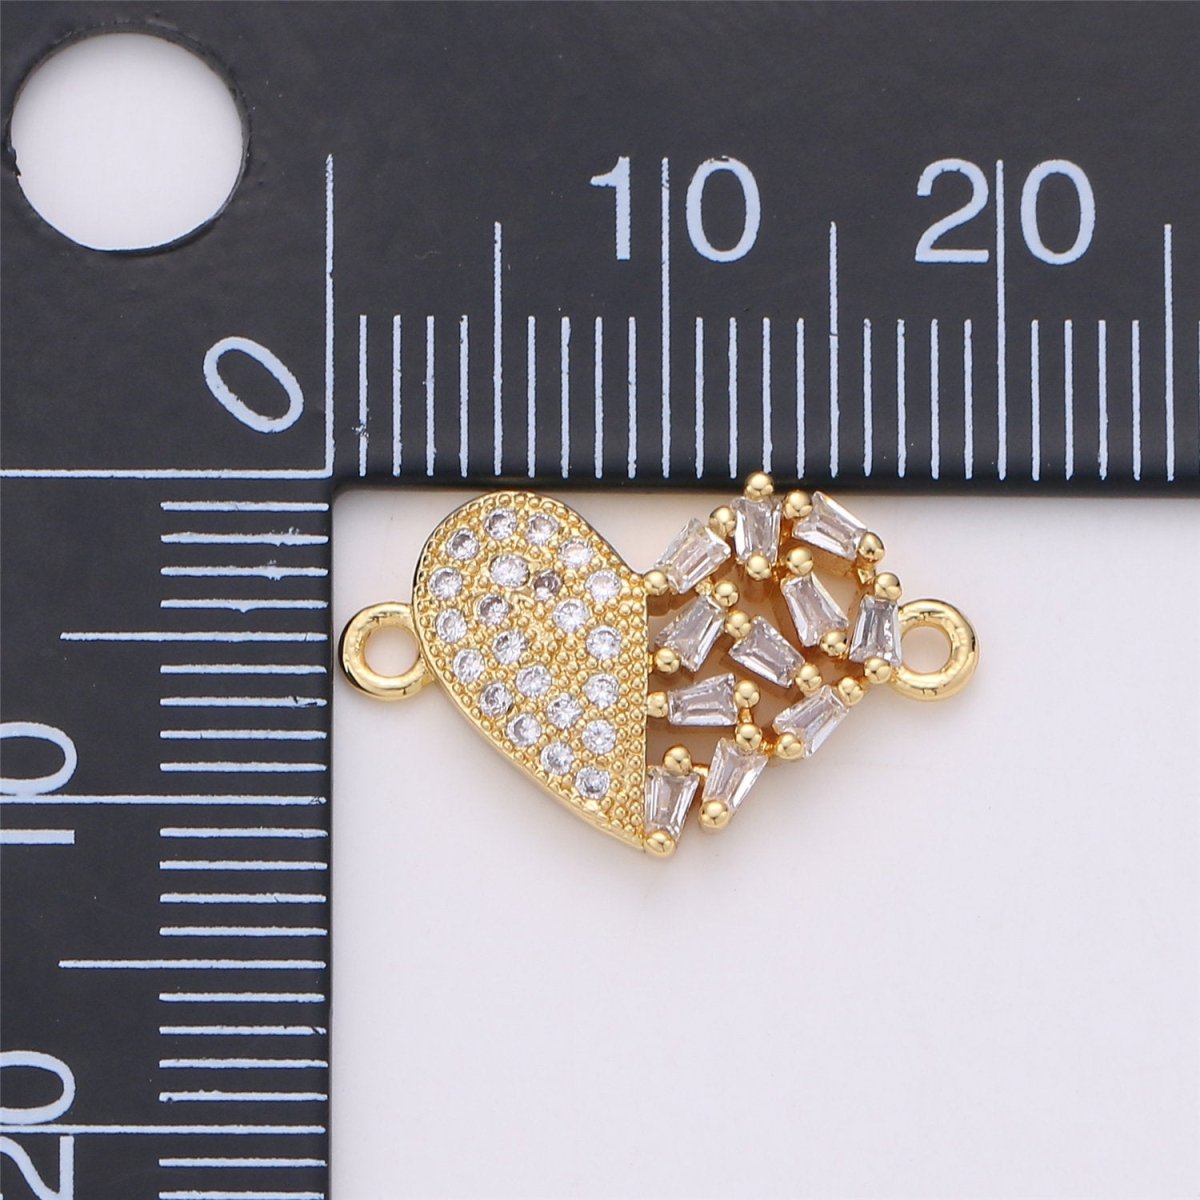 24K Gold Filled Dainty Tiny Heart Connector with Micro Pave Baguette Style Cubic Zirconia CZ Stone for Necklace or Bracelet F-355 - DLUXCA